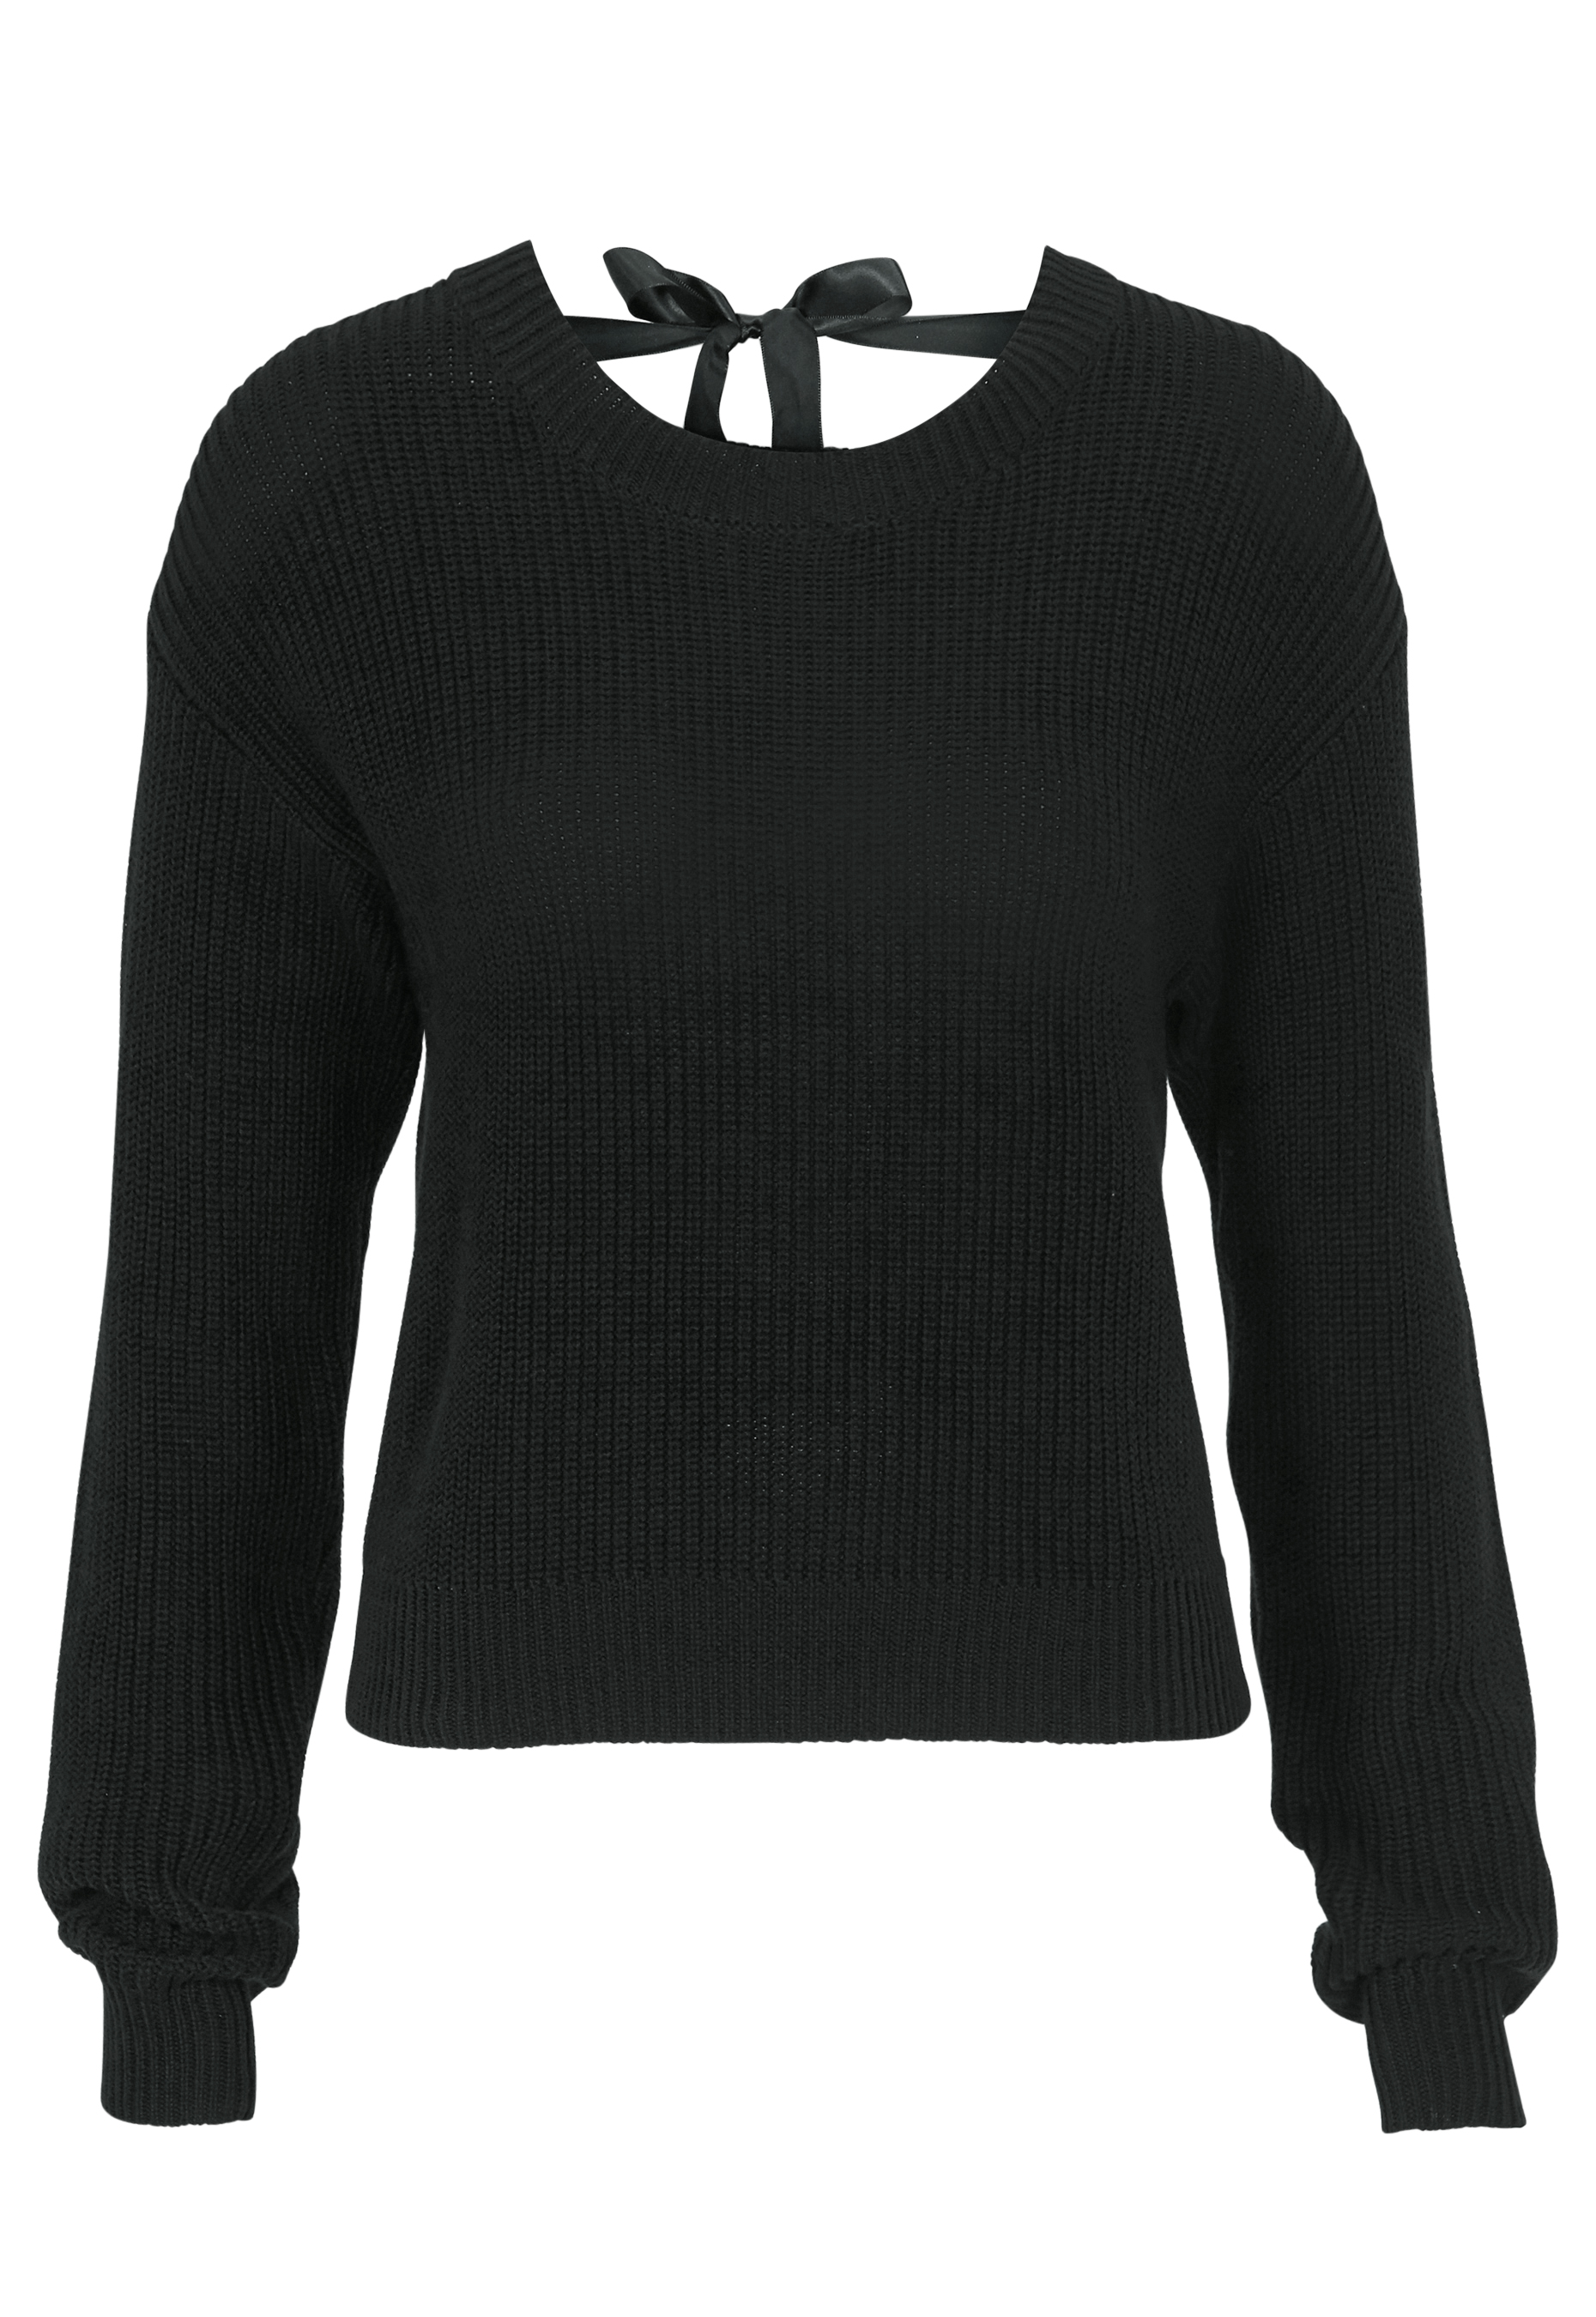 BUBBLEROOM Callie lace neck knitted sweater Black - Bubbleroom